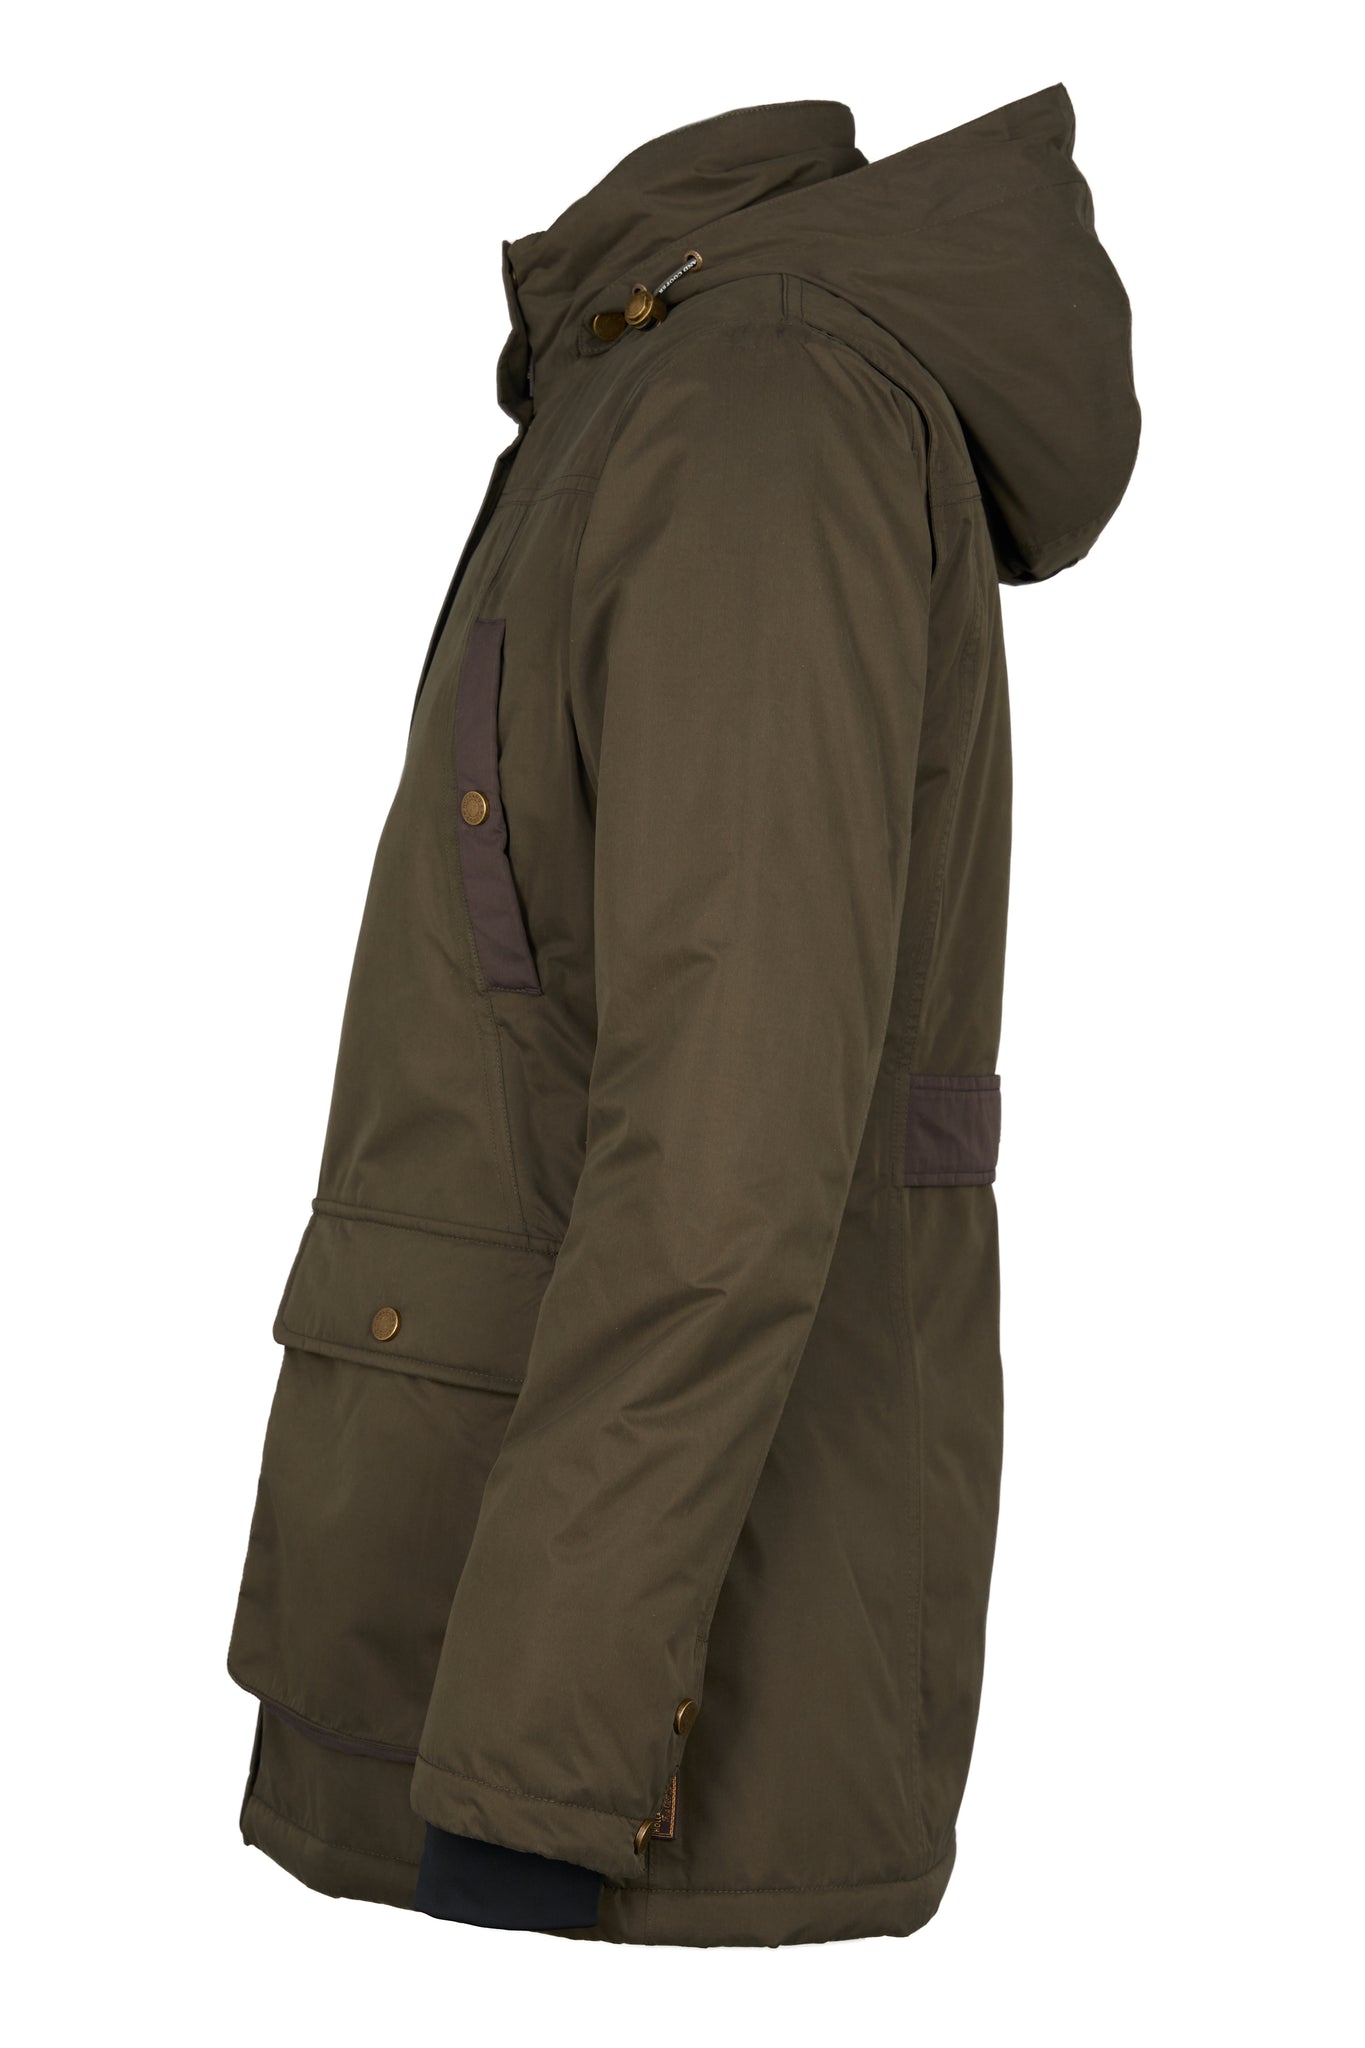 side of multiway coat in khaki that works as a 3 in 1 a waterproof outer coat with stowaway hood and deep pockets and black jersey storm cuffs and a fleece gilet inner with tan leather trims can be worn together or separately